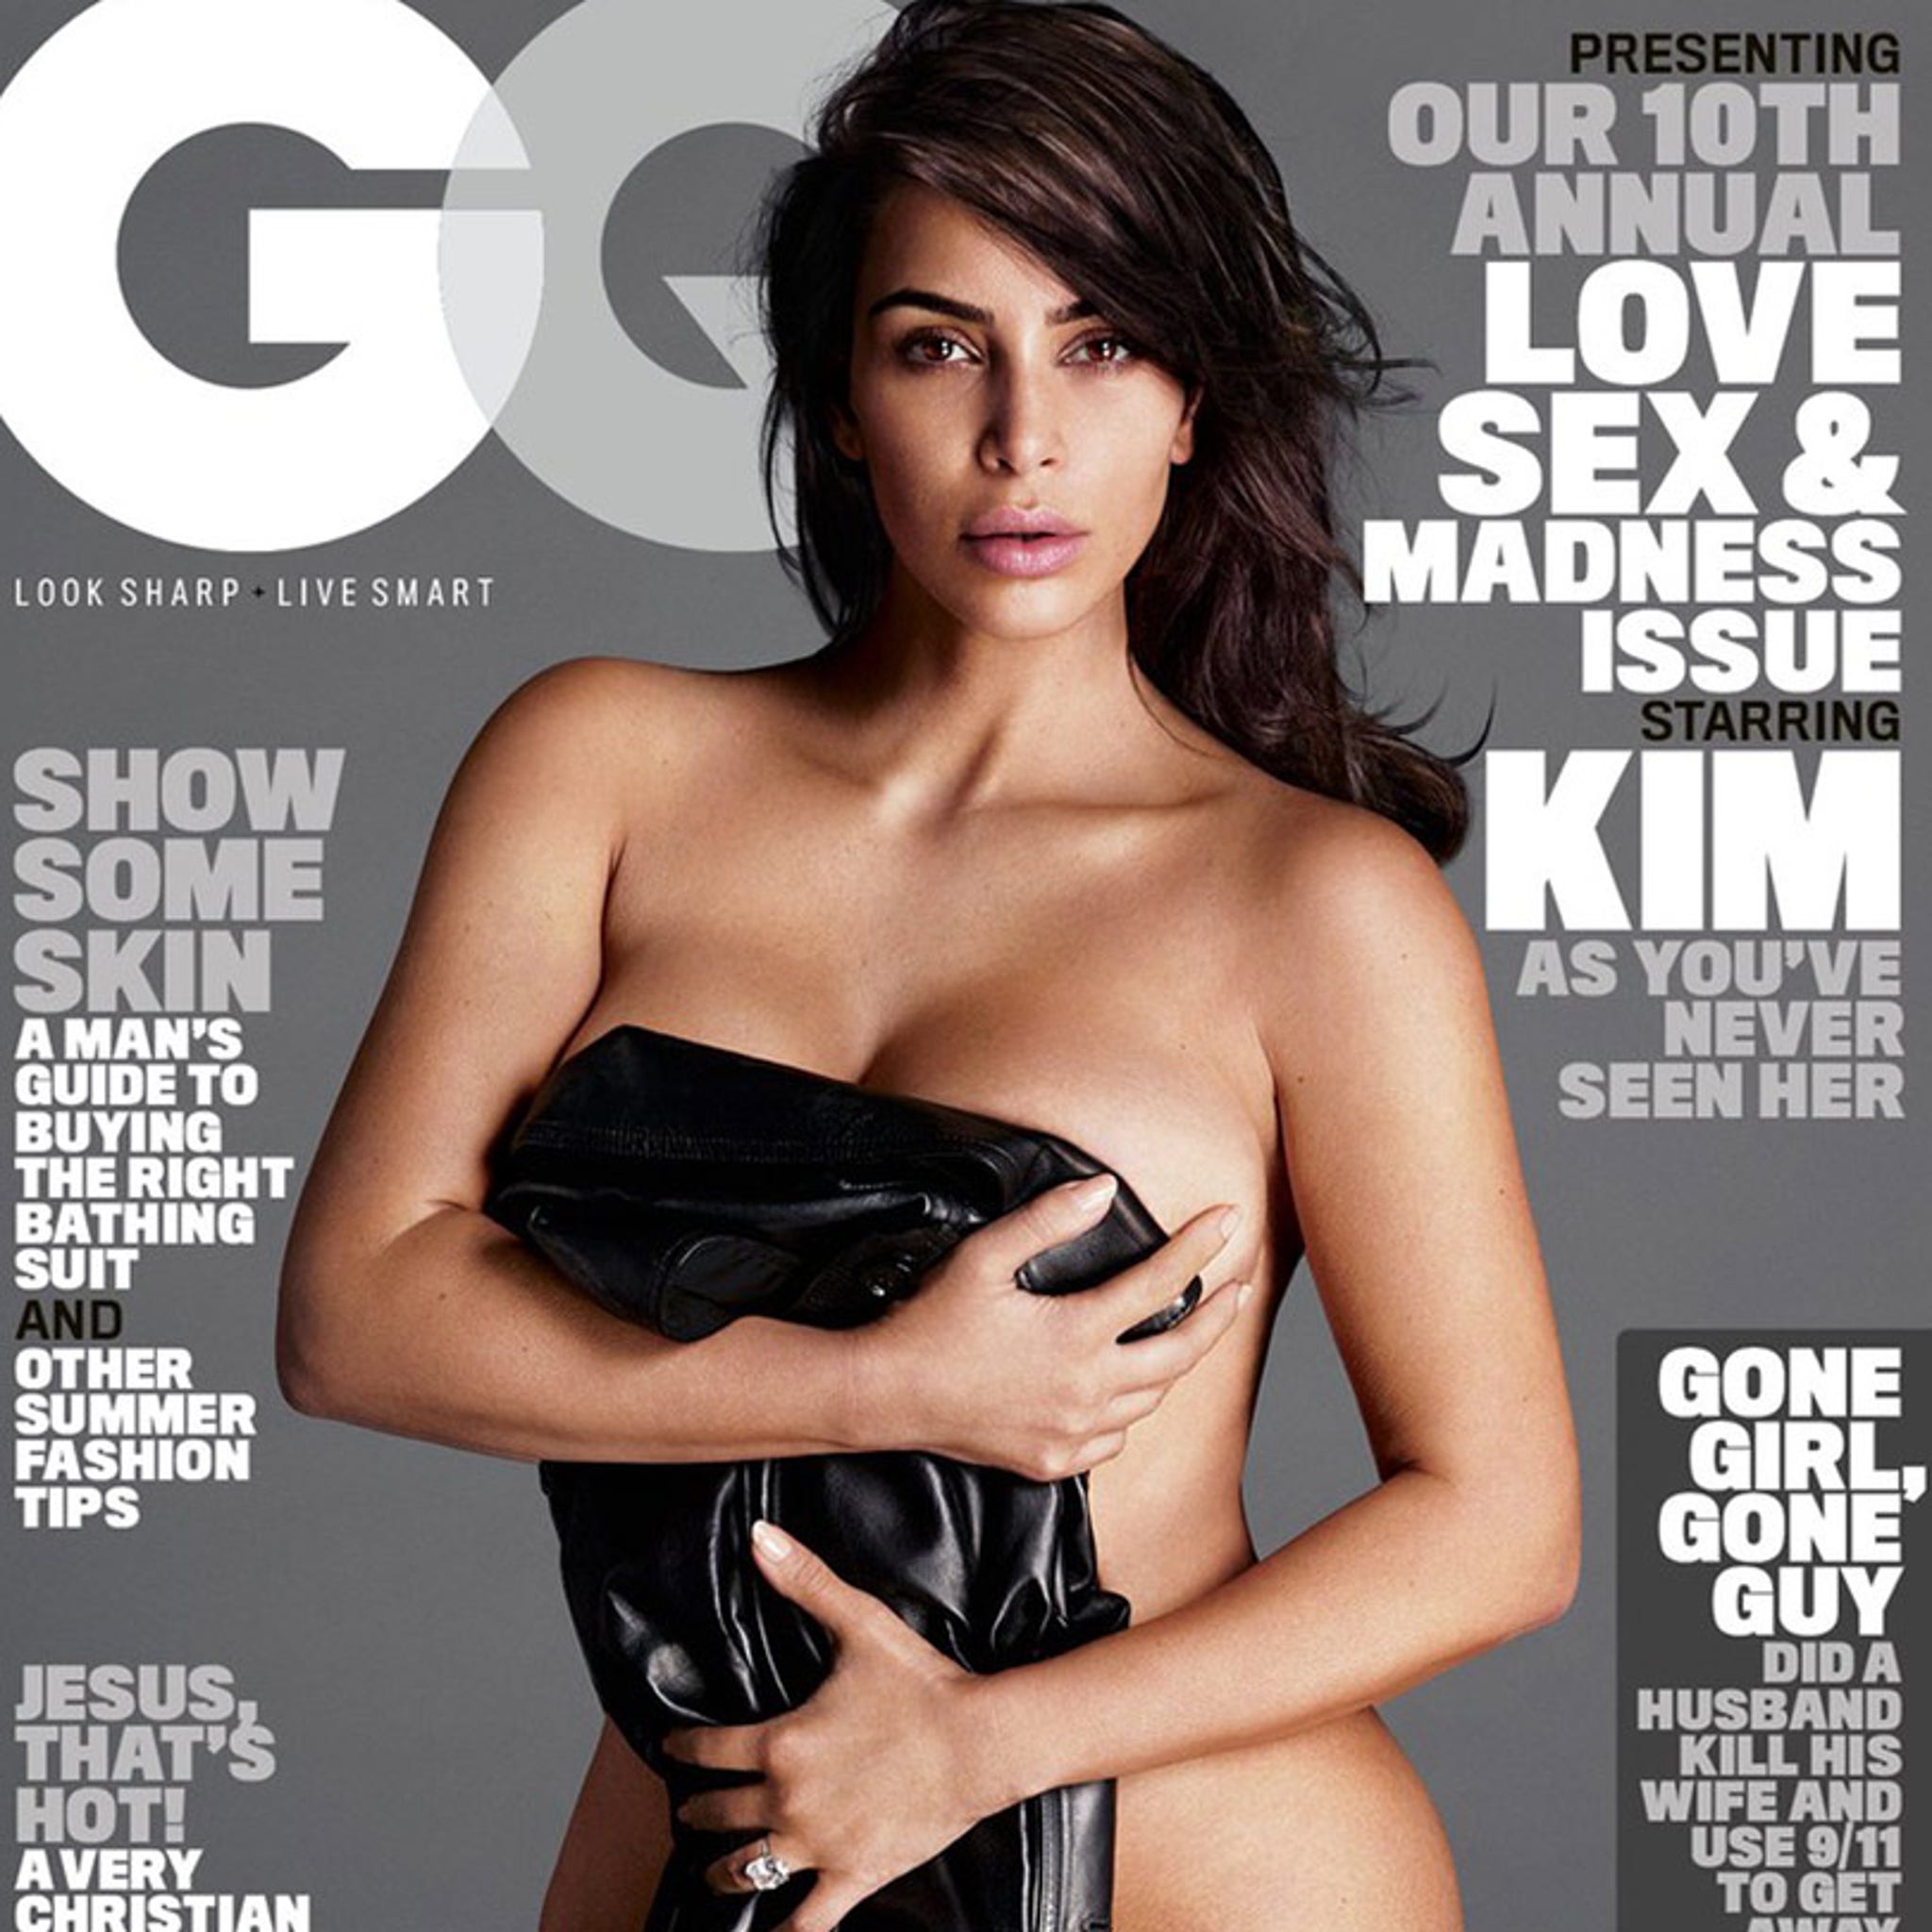 Kim Kardashian Covers GQ Completely Naked After Dropping 60lbs Of Baby Weight!